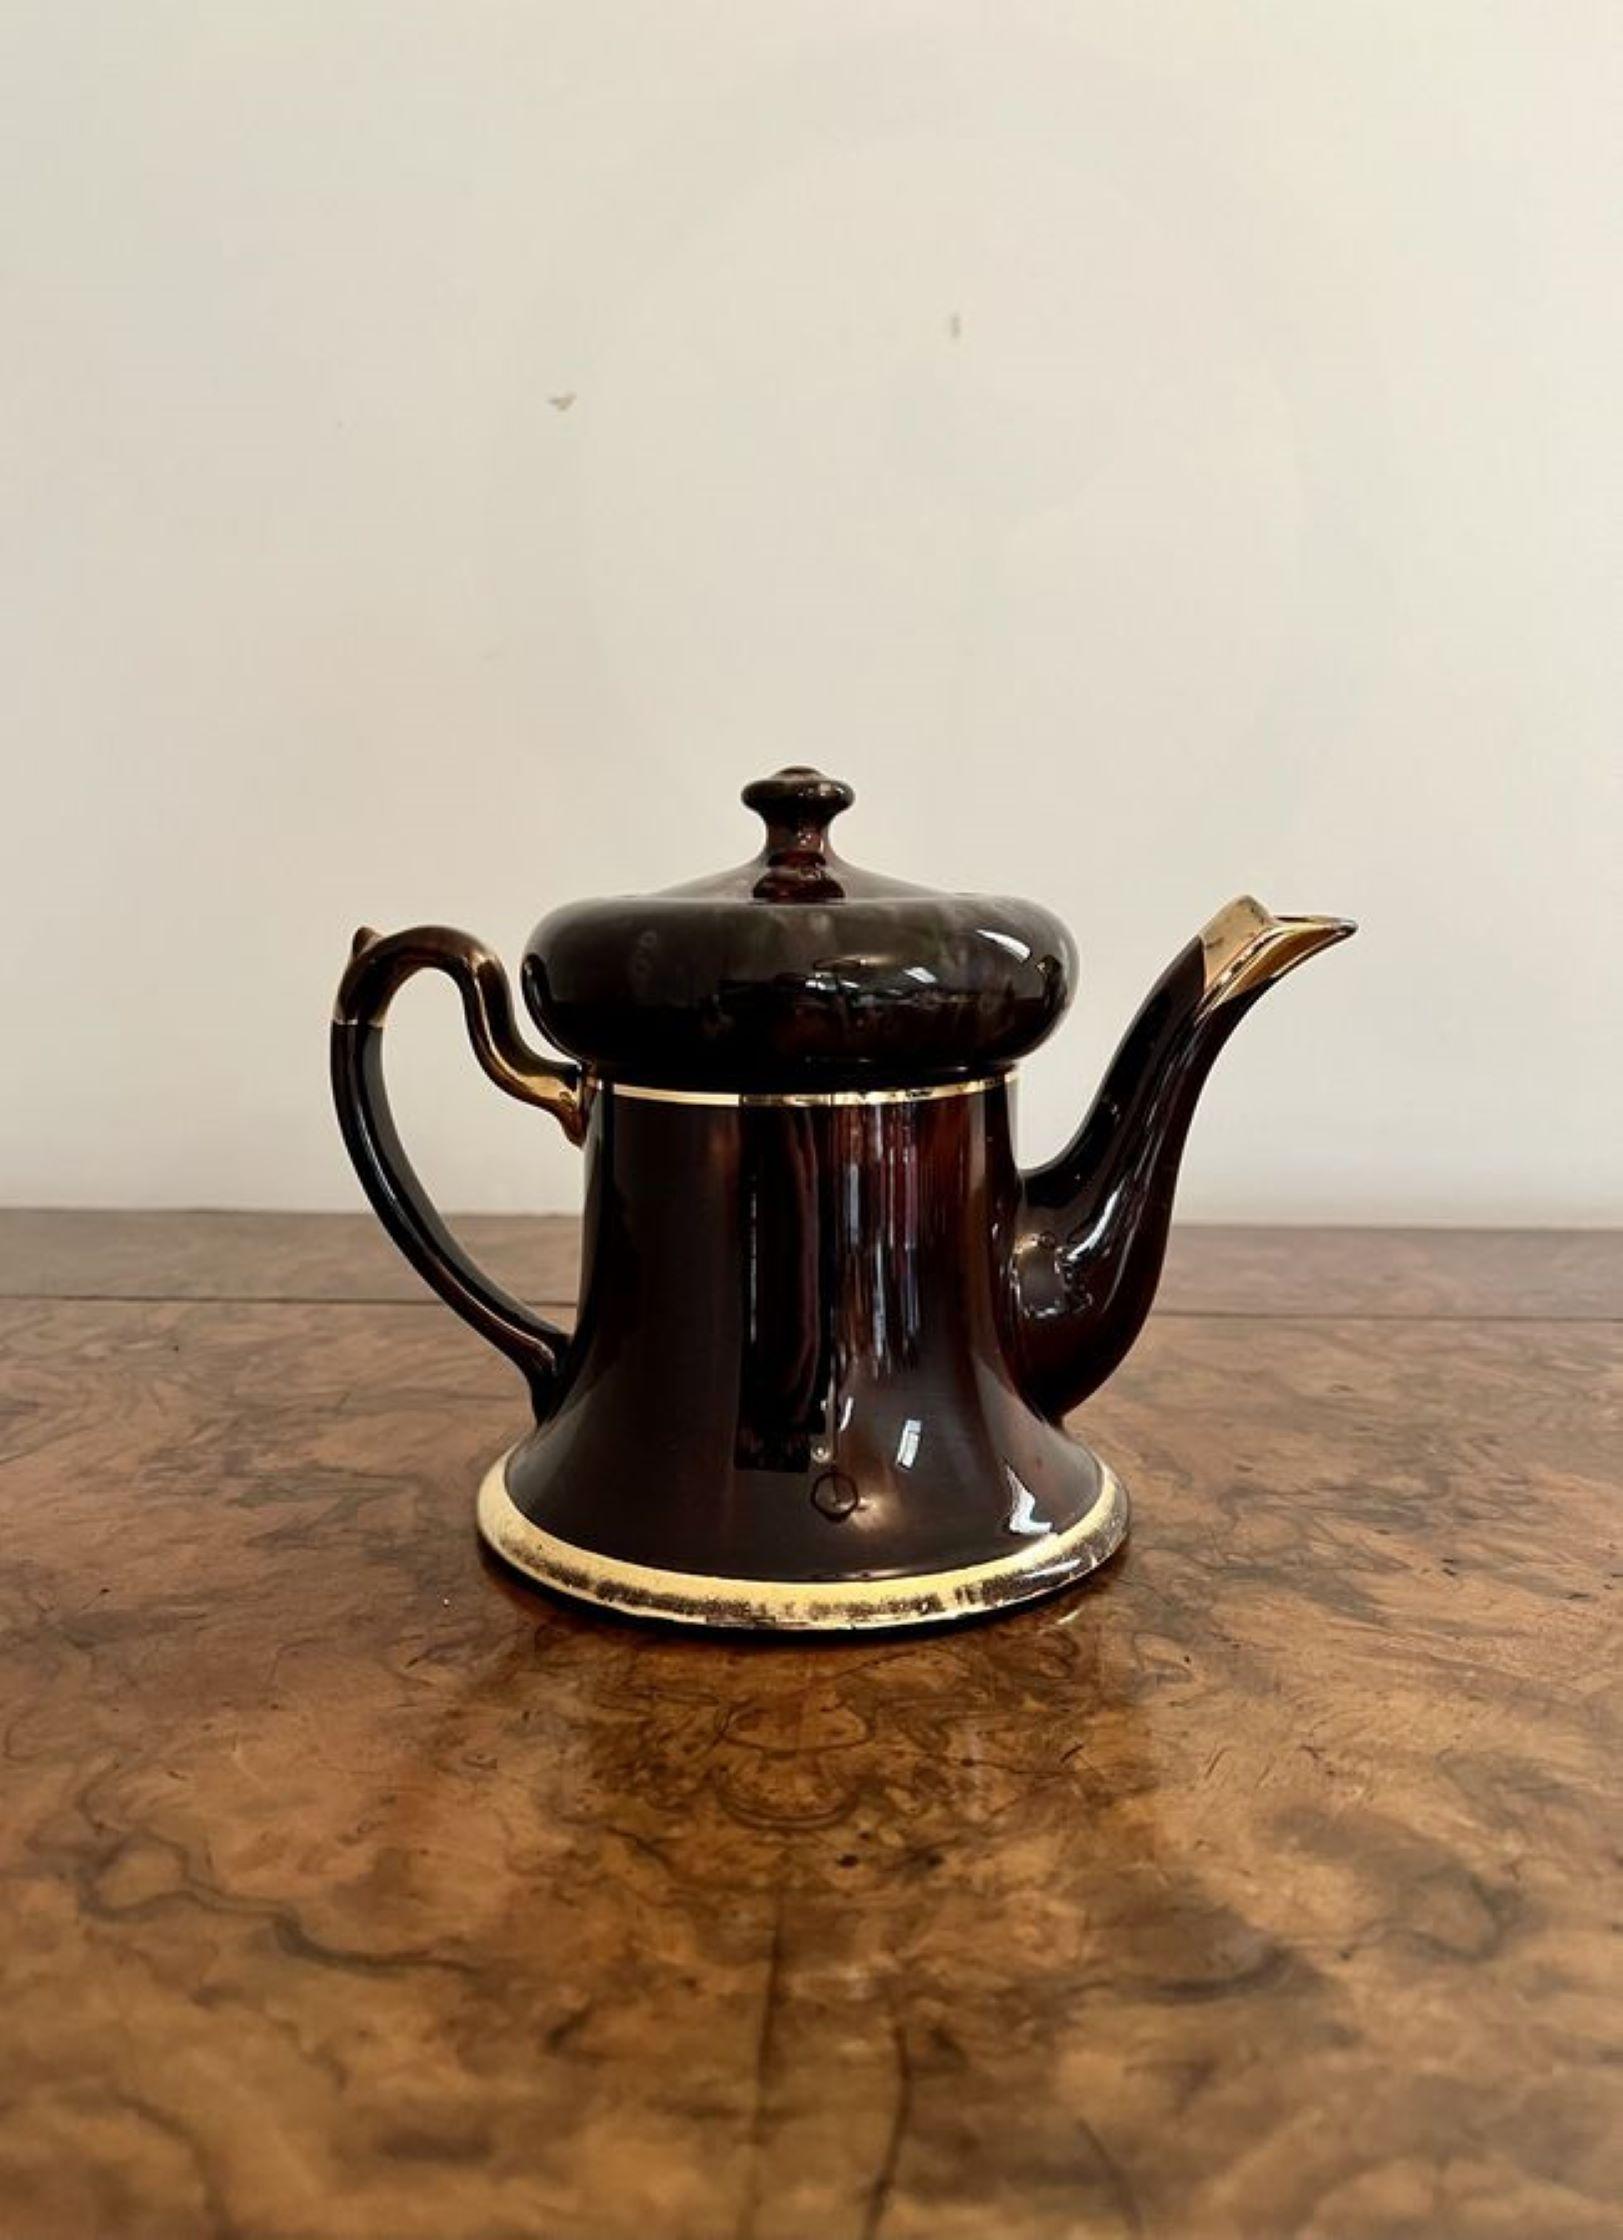 Unusual antique Edwardian glazed brown & gold teapot having a quality brown glazed and gold teapot with a shaped handle and spout with the original lid.

D. 1900